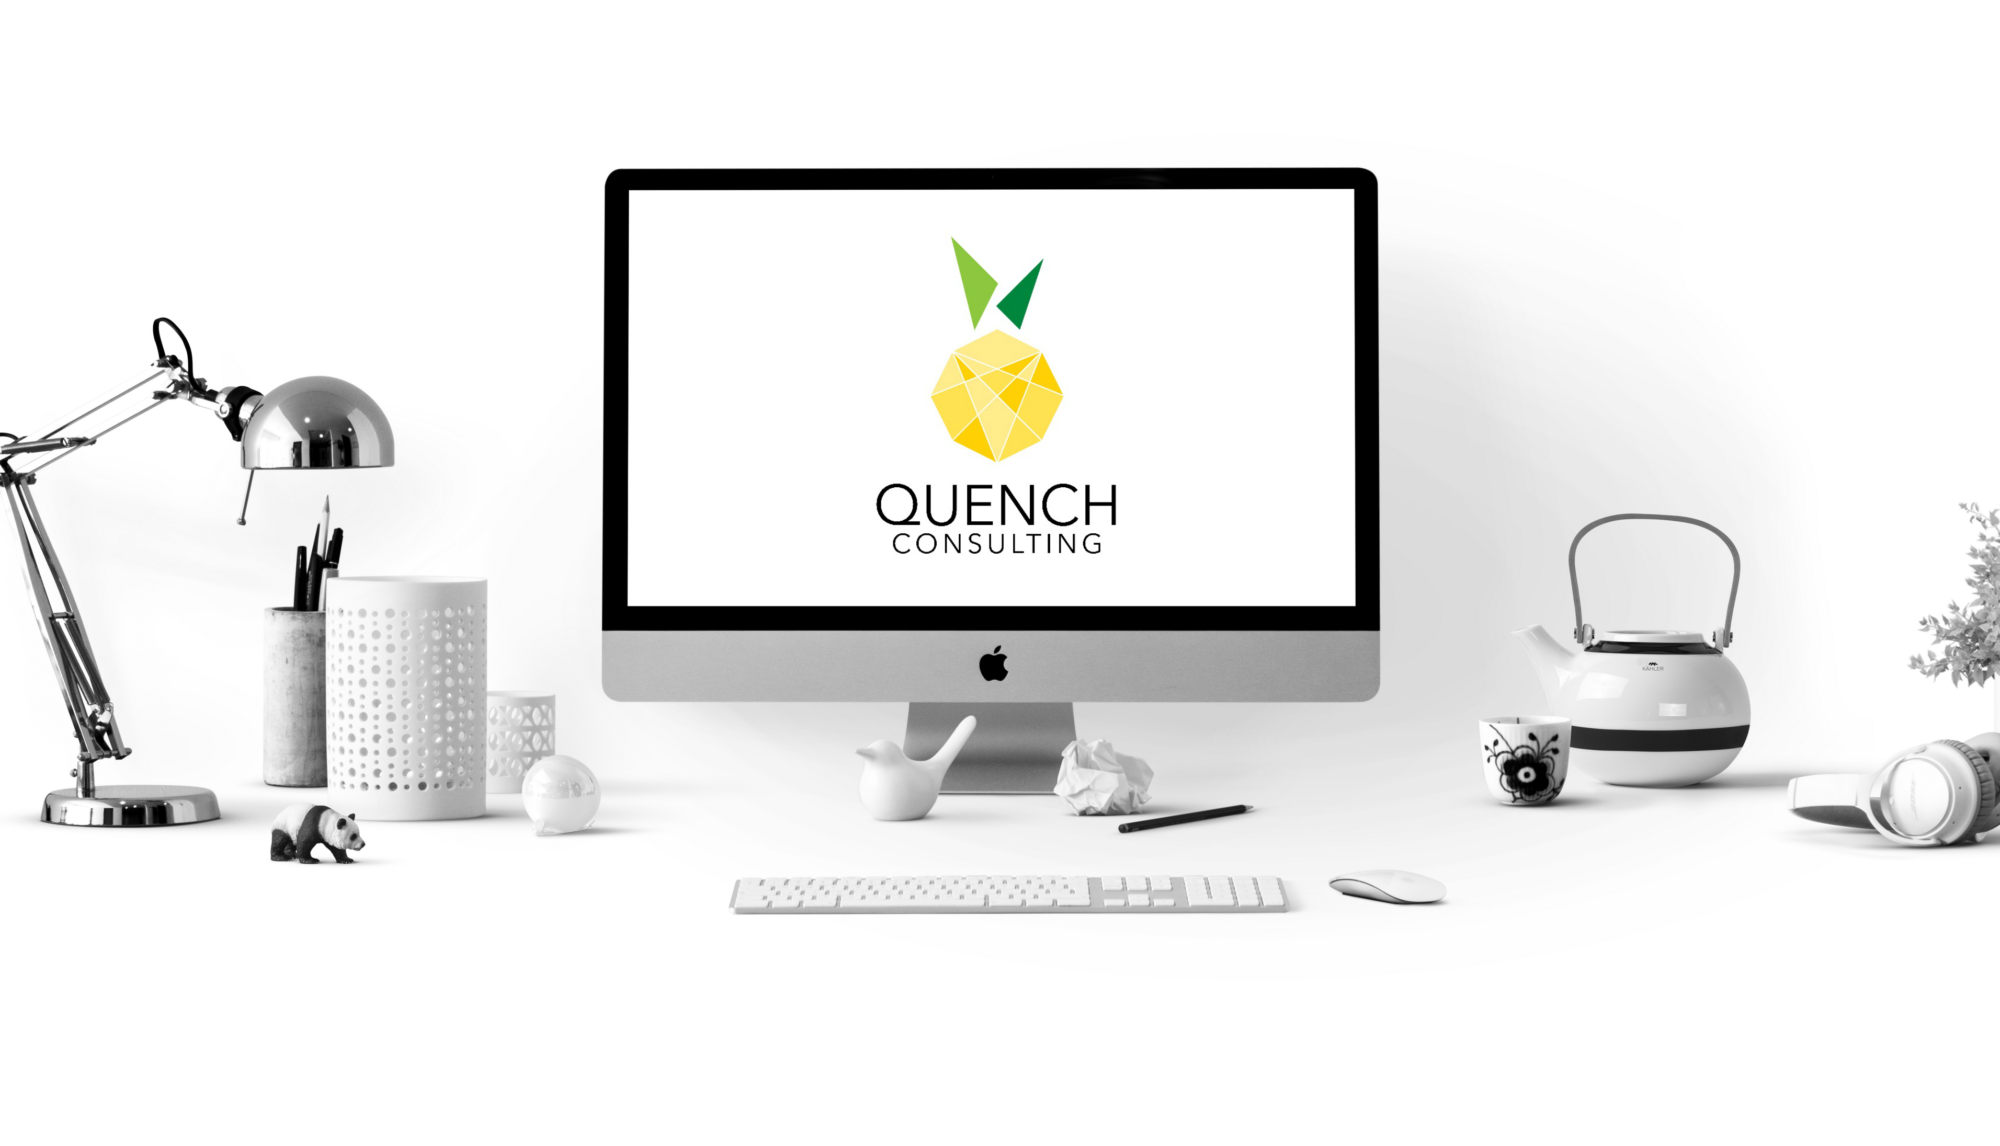 Quench Consulting